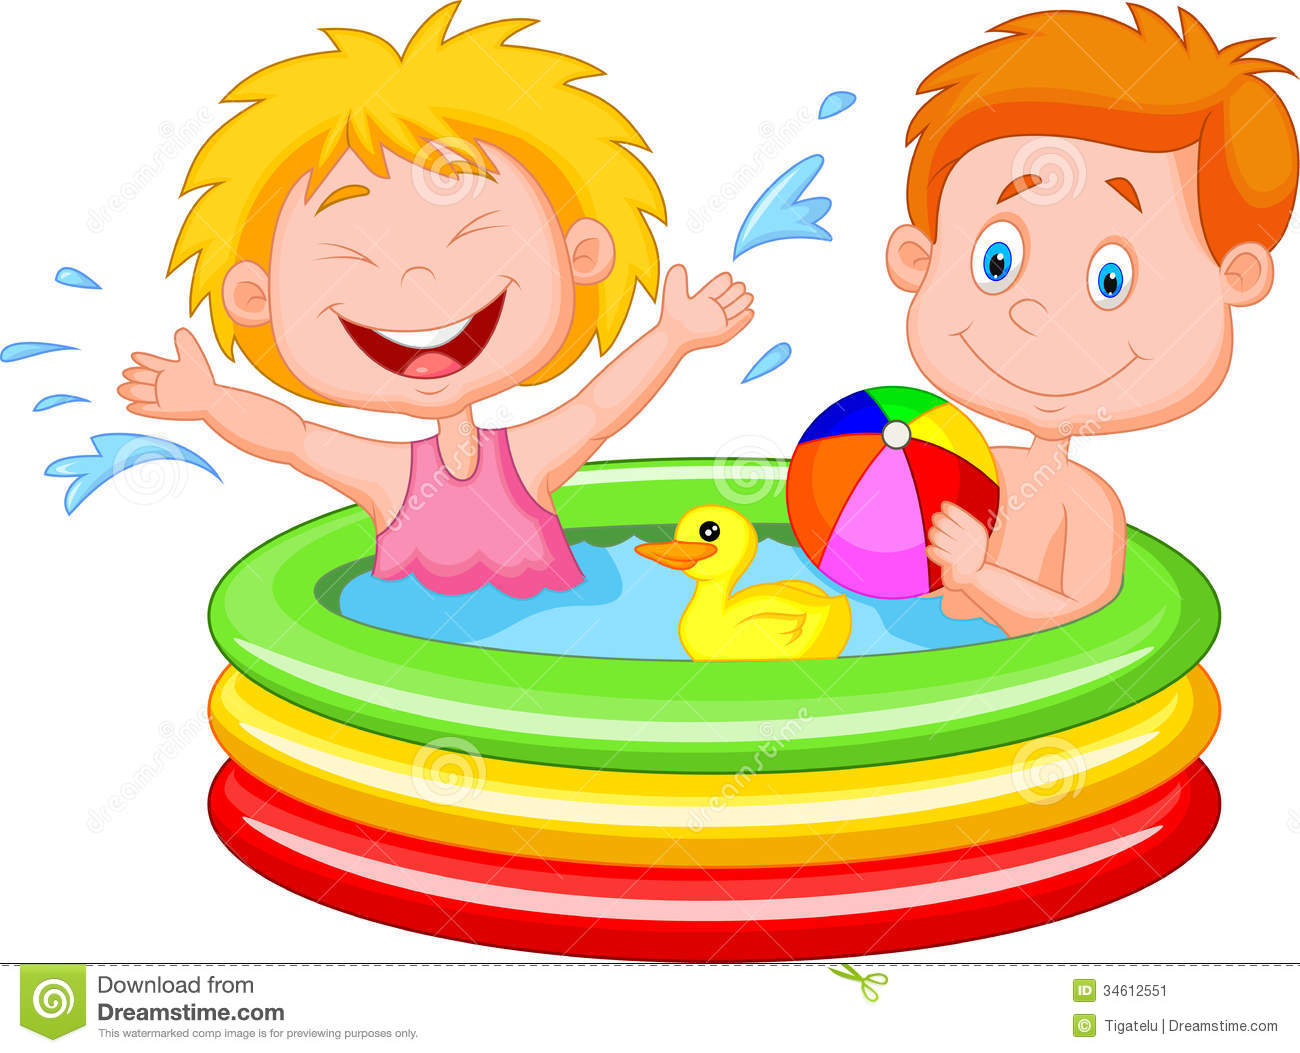 Kids Playing In An Inflatable Pool Stock Image   Image  34612551